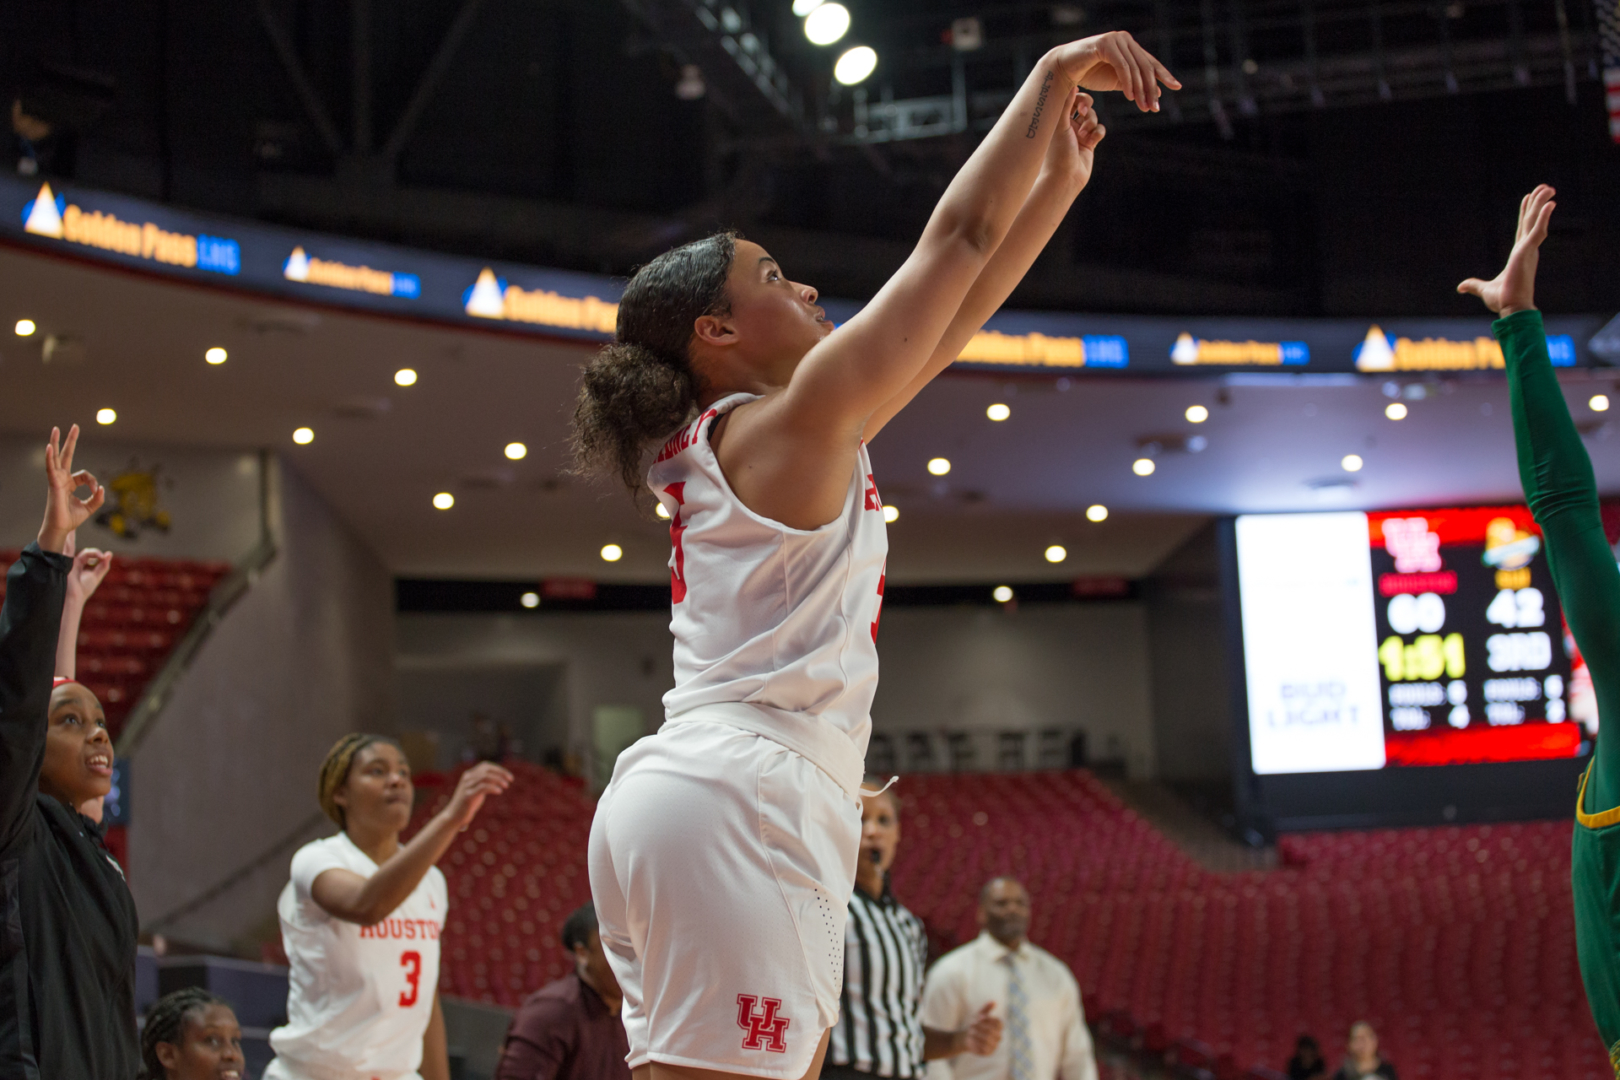 As UH Women's Basketball goes against SMU on Wednesday, UH Athletics will celebrate National Girls &amp; Women In Sports Day. | Trevor Nolley/The Cougar